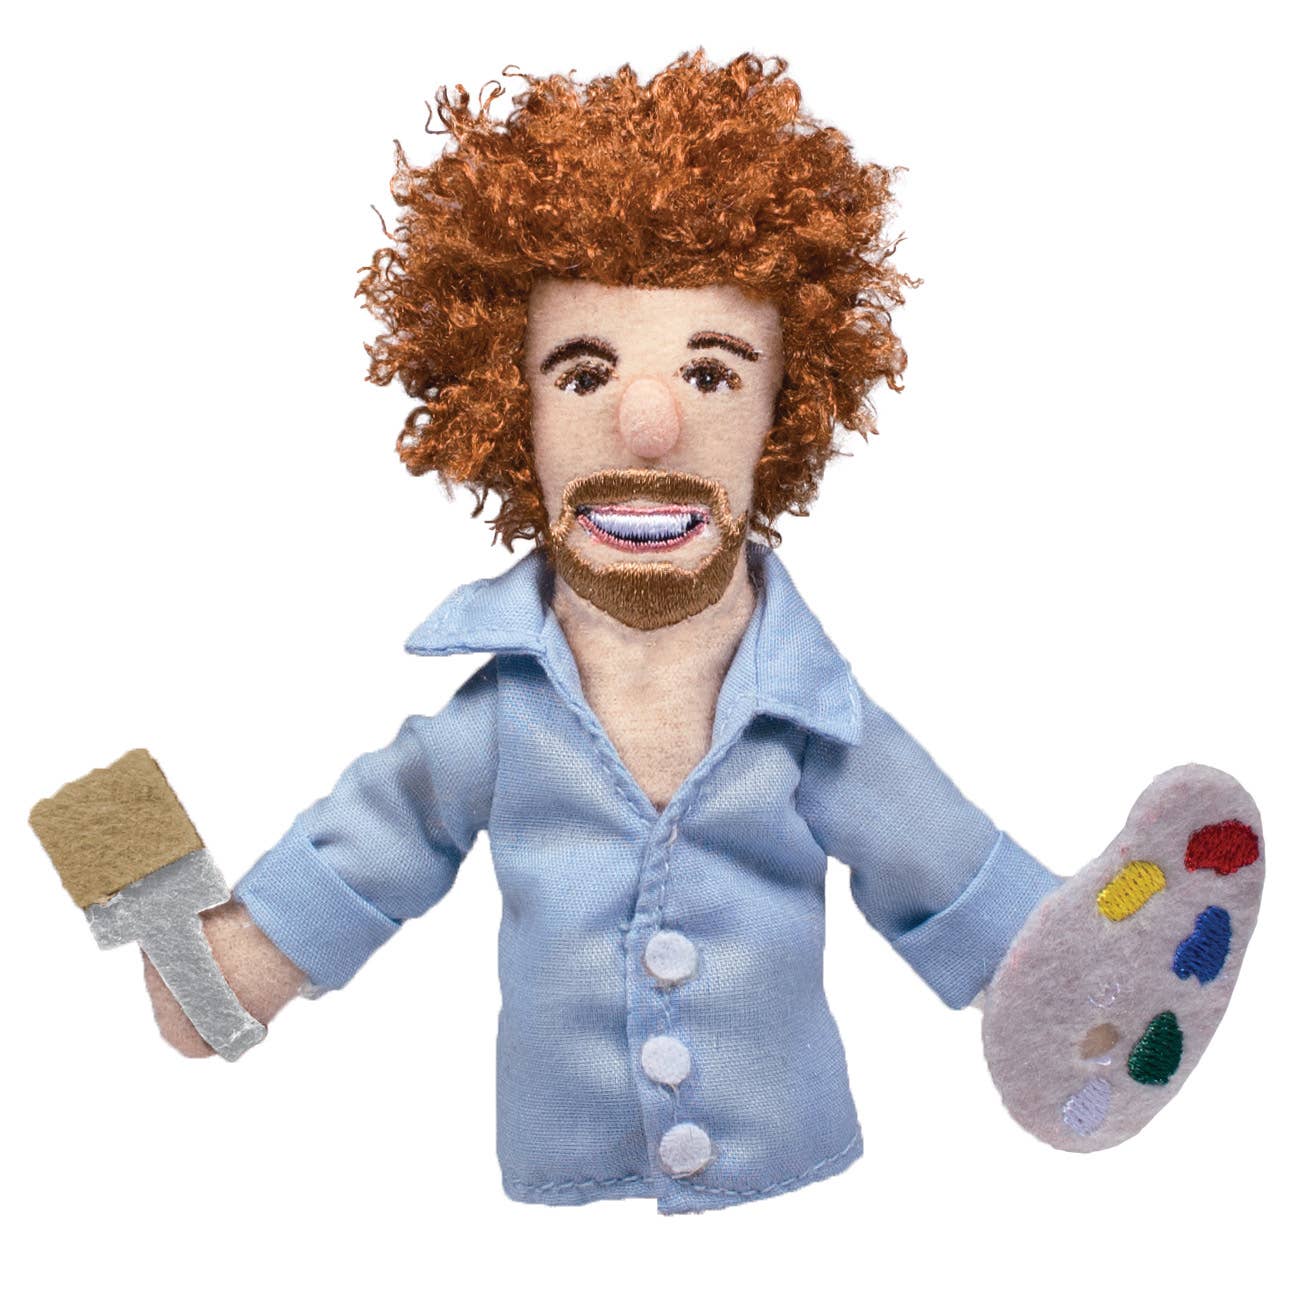 Bob Ross Finger Puppet from Unemployed Philosophers Guild